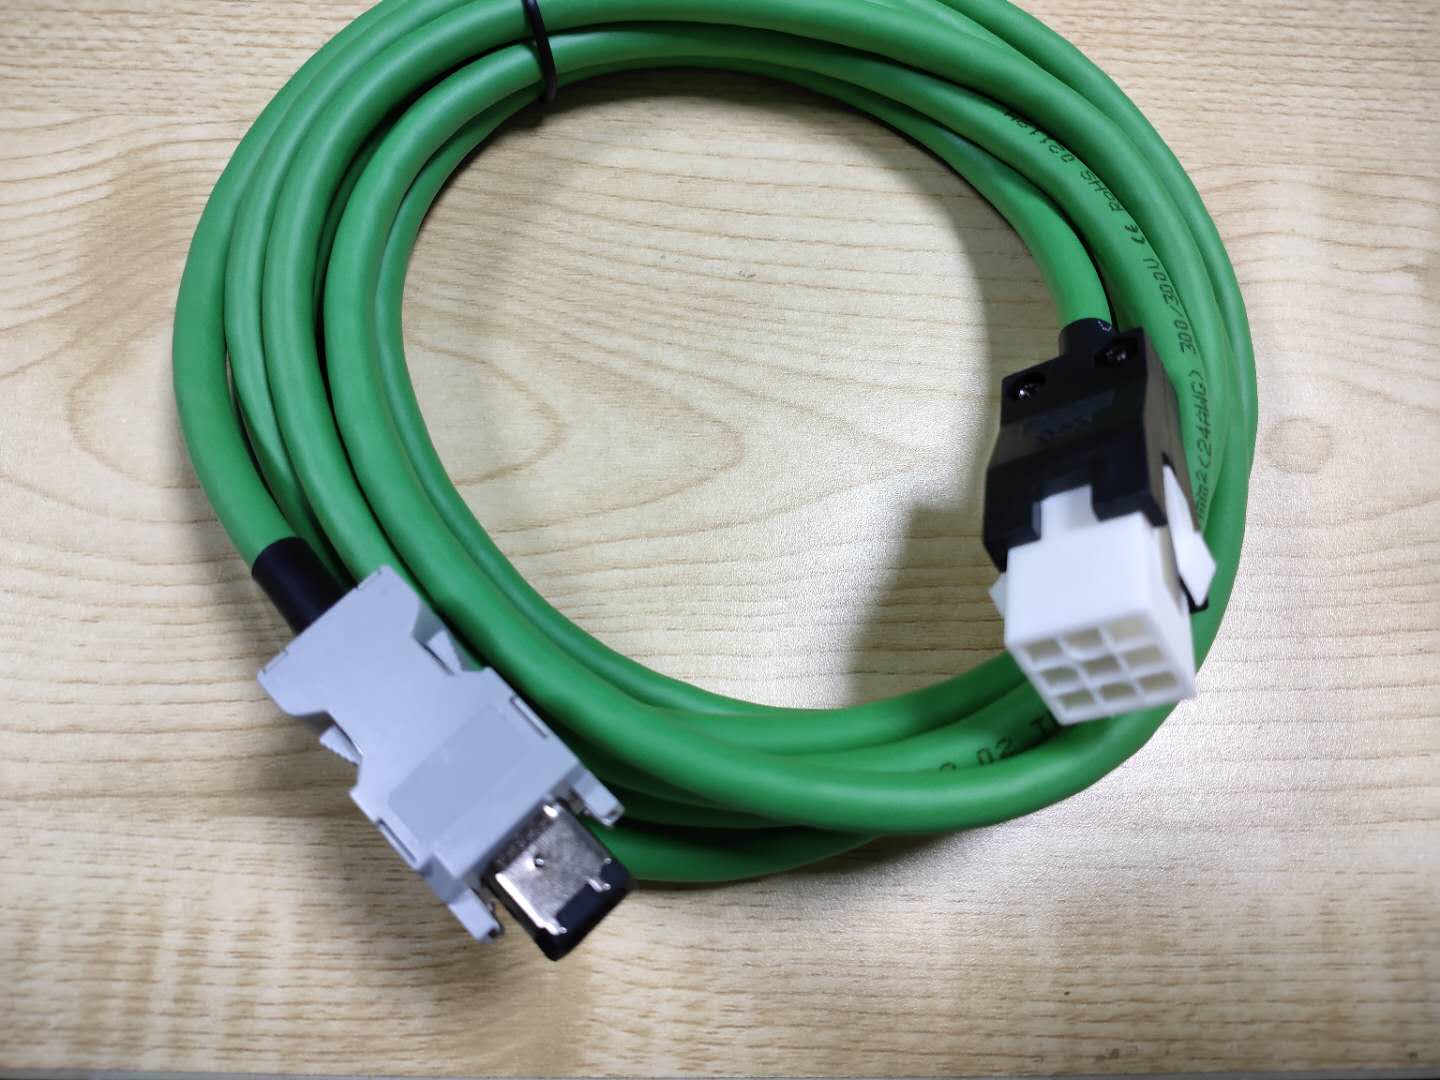 IEEE 1394 signal cable assembly